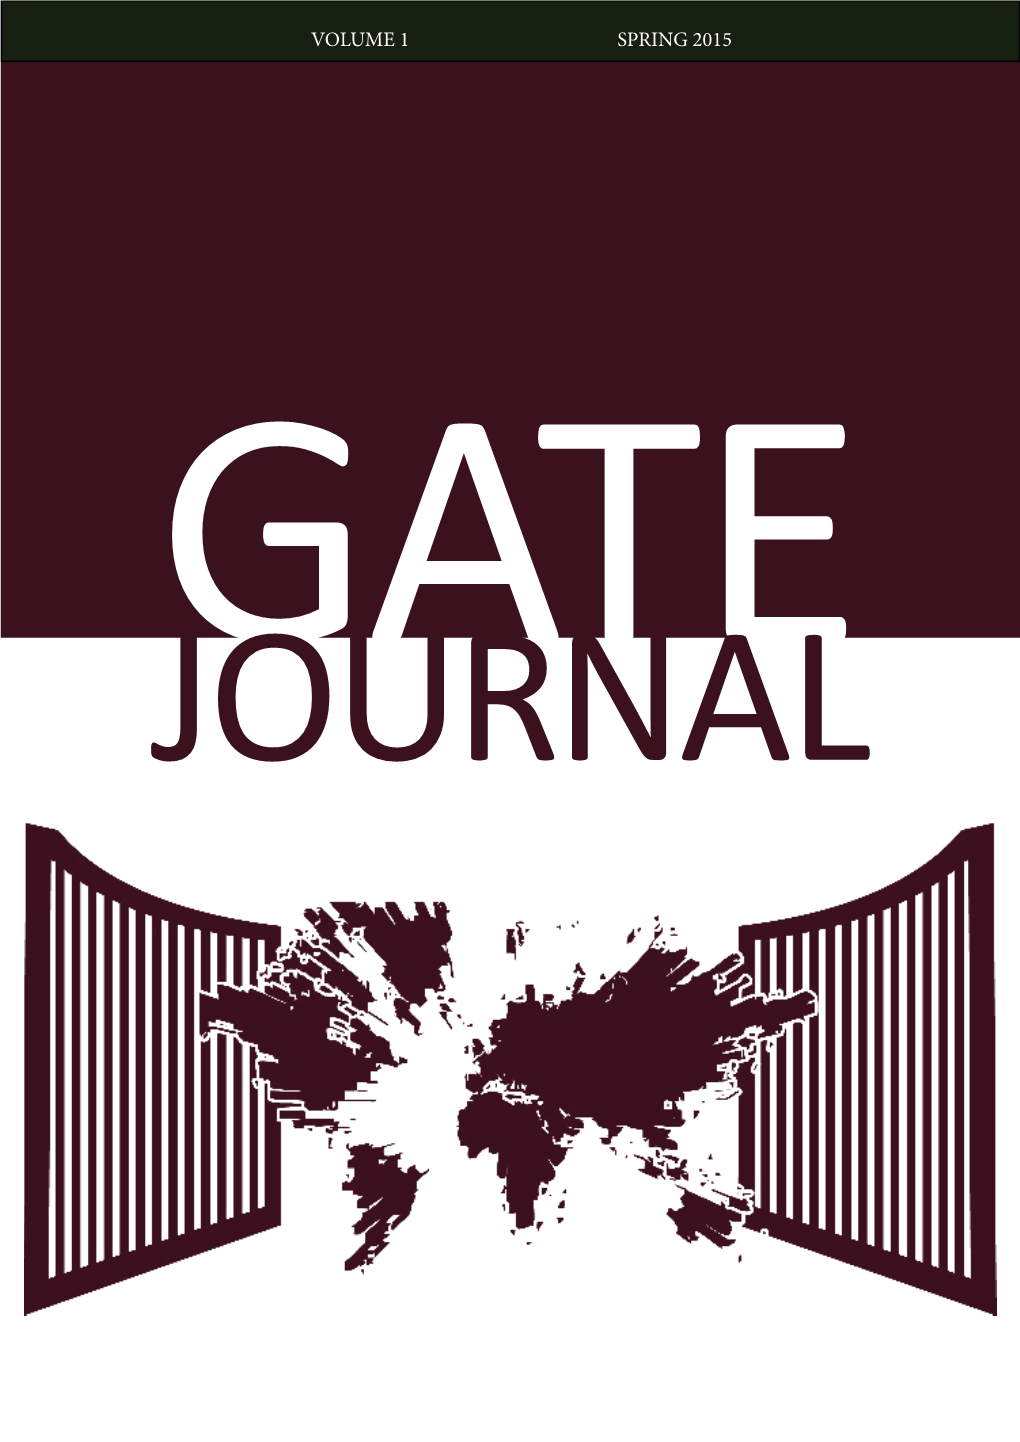 Read the Spring 2015 Edition of the GATE Journal